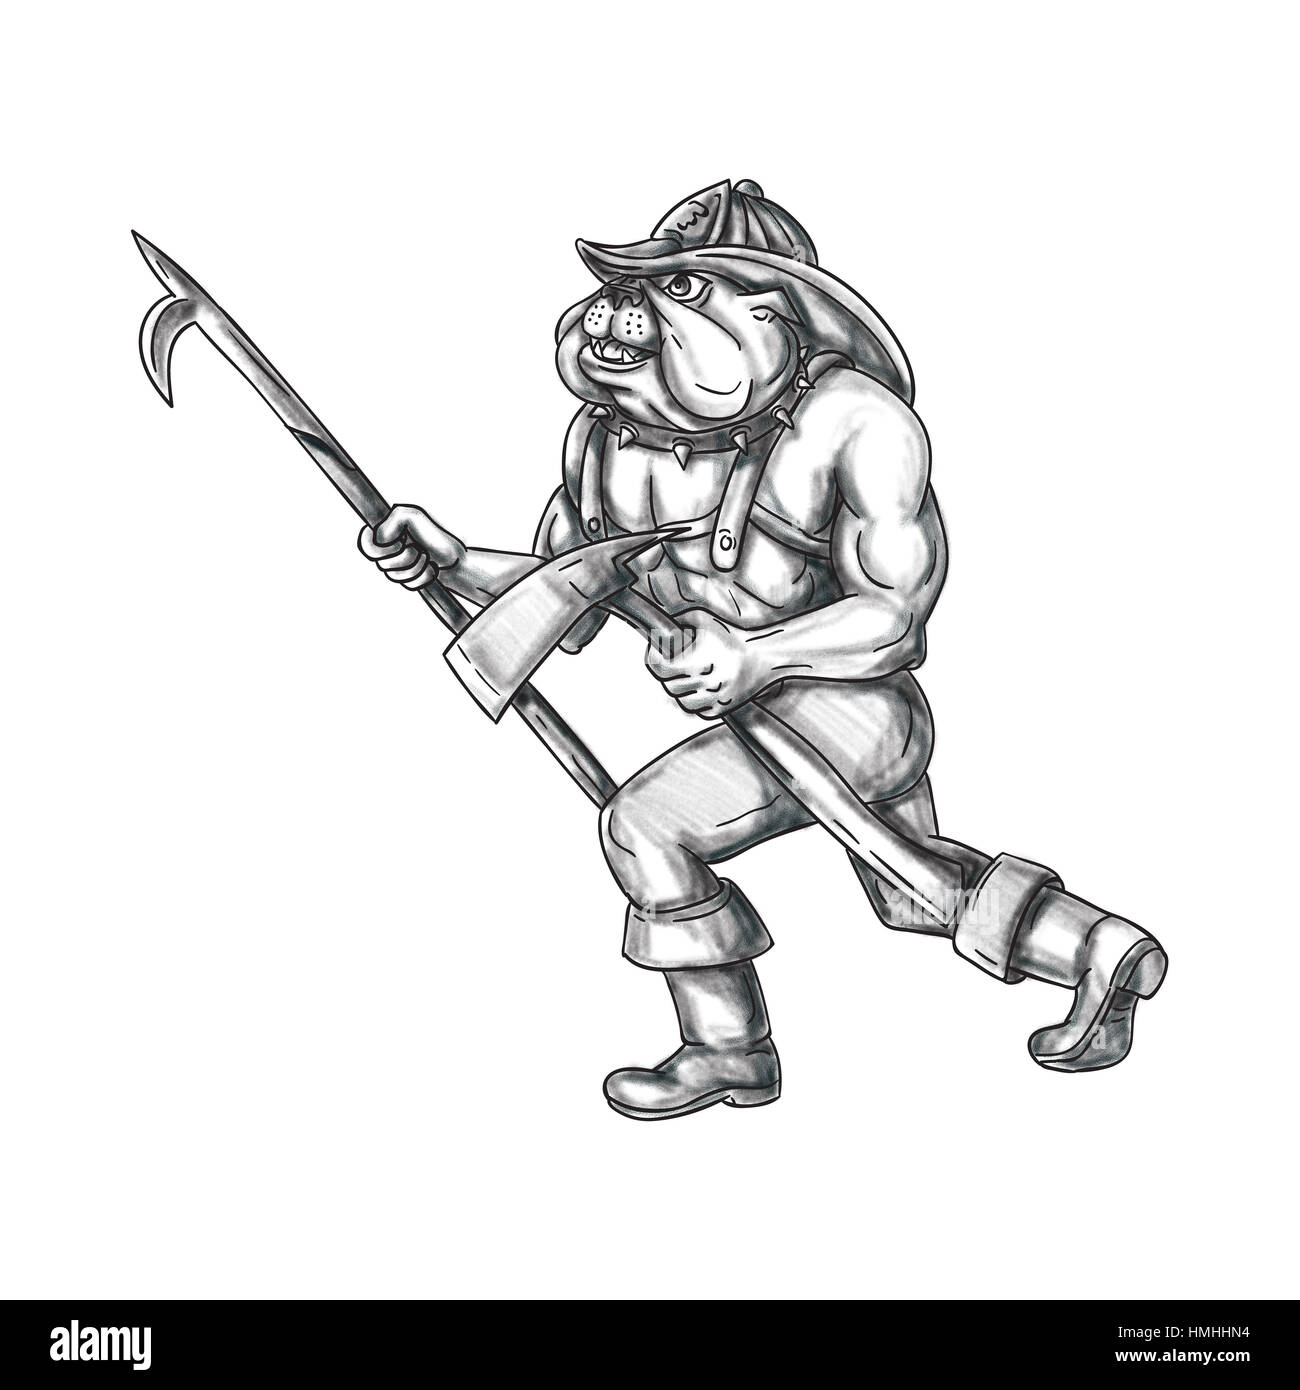 Tattoo style illustration of a bulldog firefighter holding pike pole and fire axe walking viewed from the side set on isolated white background. Stock Photo